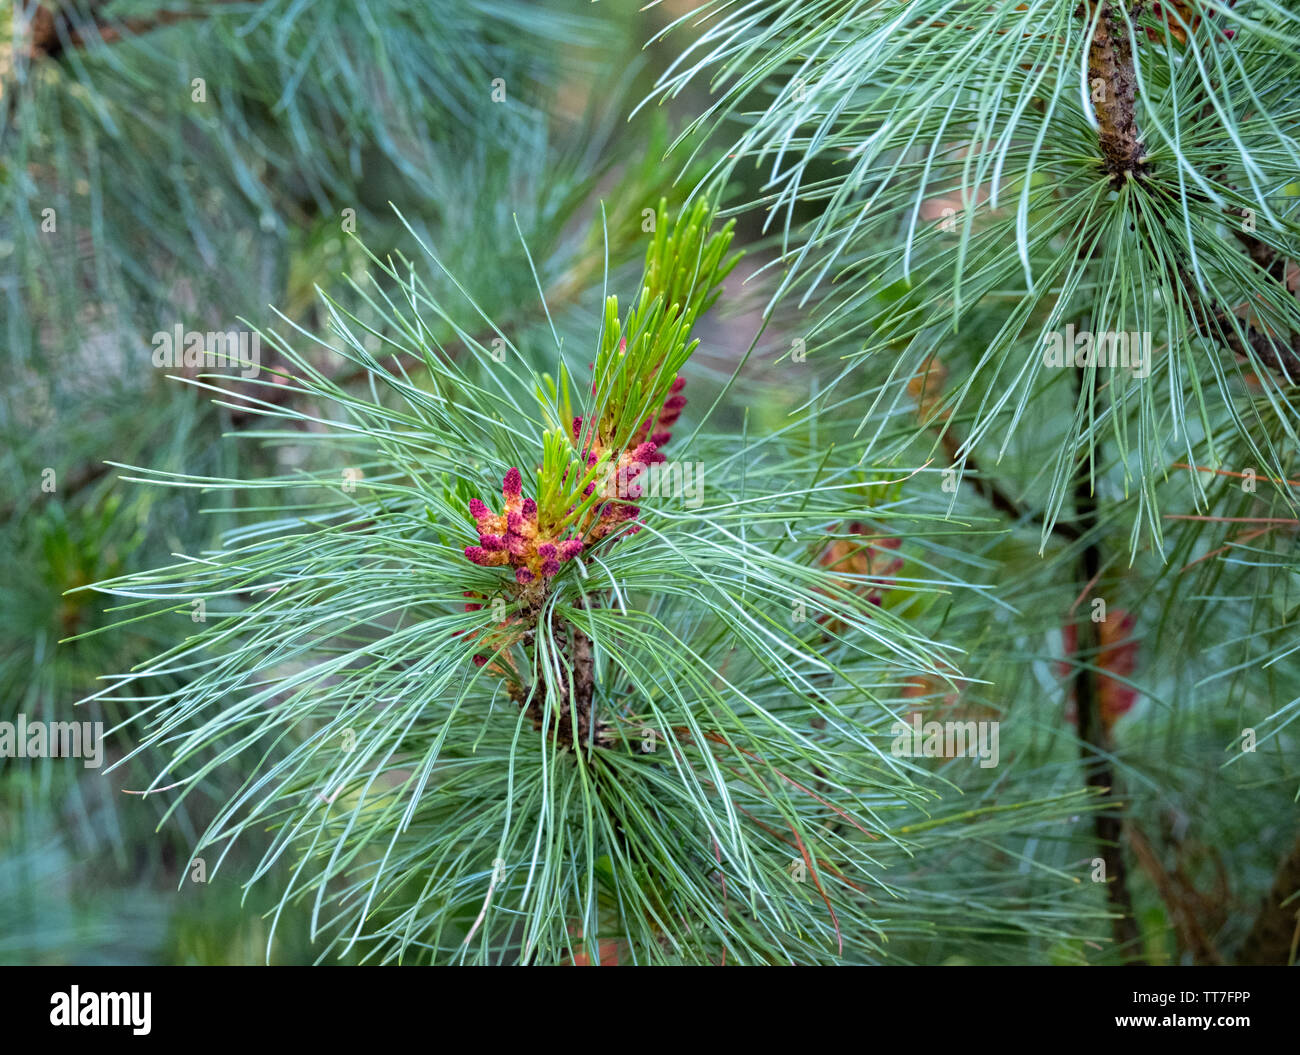 Abies arizonica. Pinaceae - genus of pine. View of the little blossoming fir cones Stock Photo